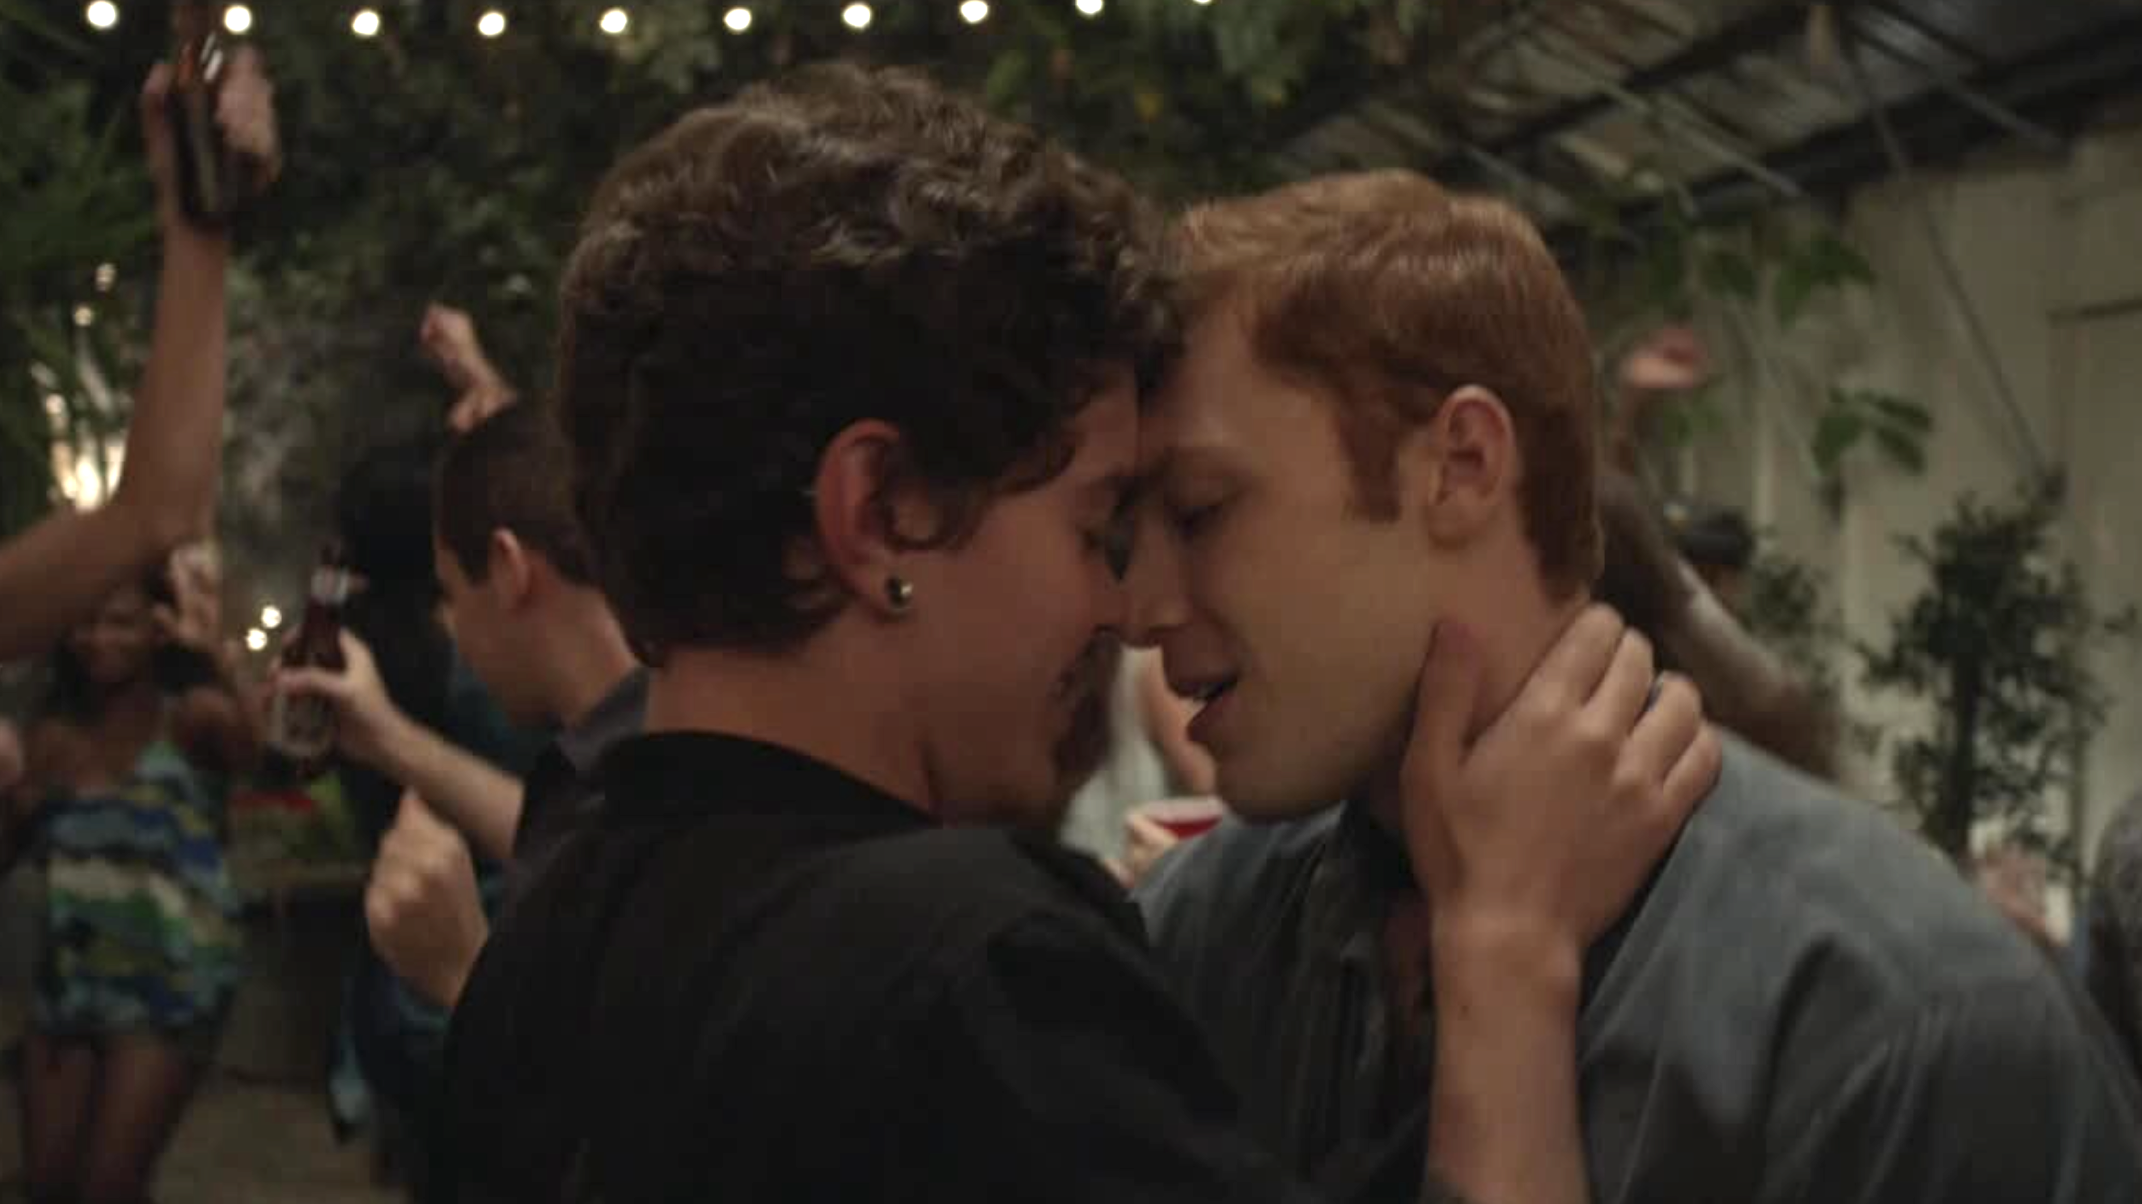 trevor and ian from shameless are about to kiss